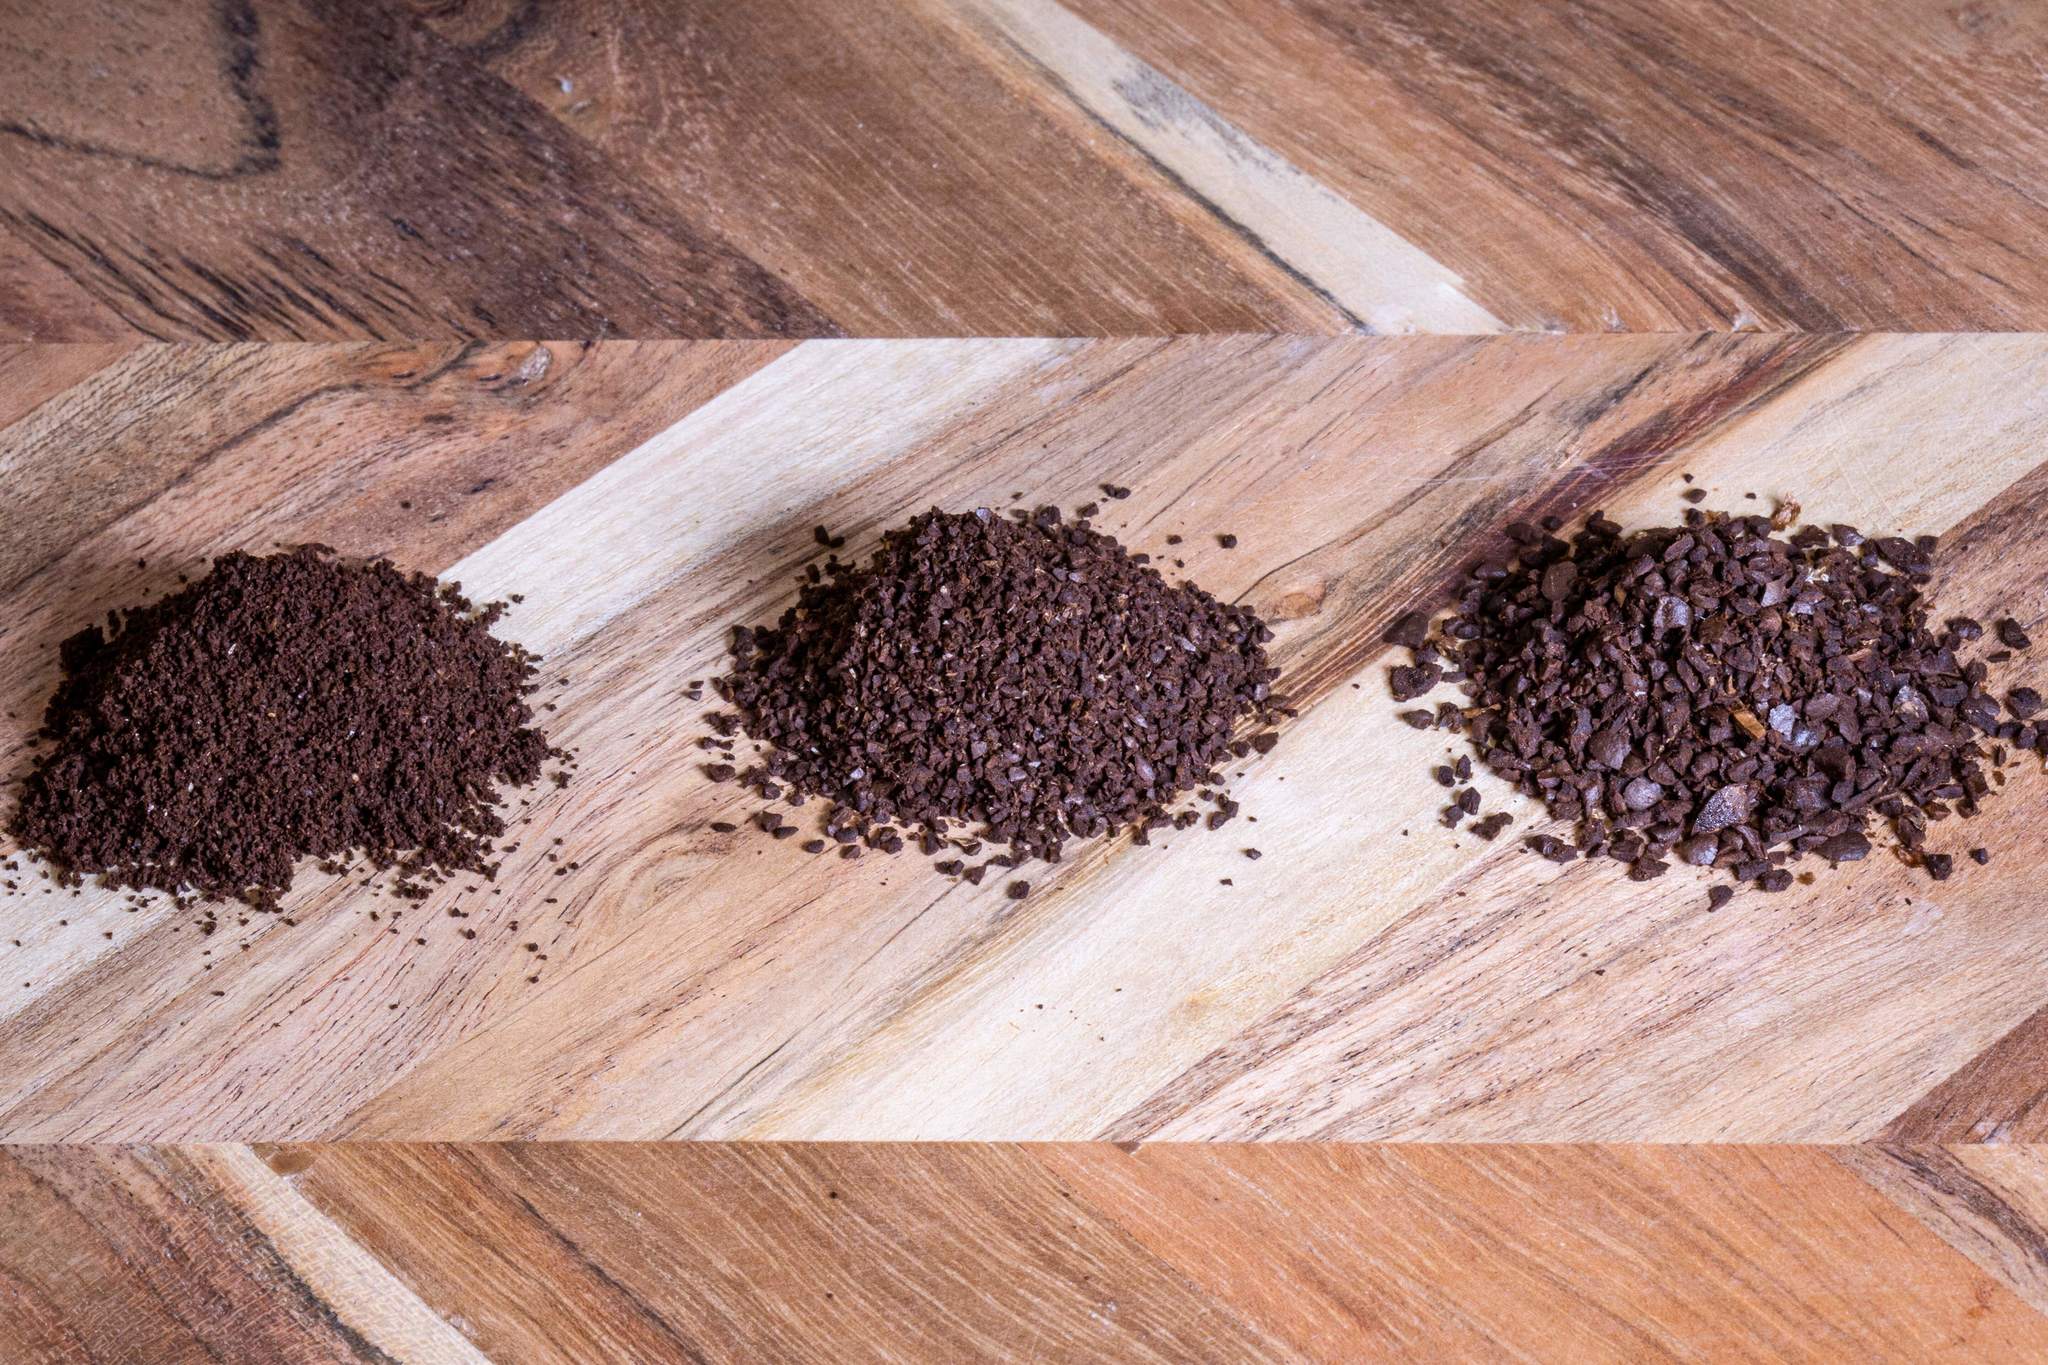 Erin's (slightly-biased) Guide to Grinding Coffee at Home